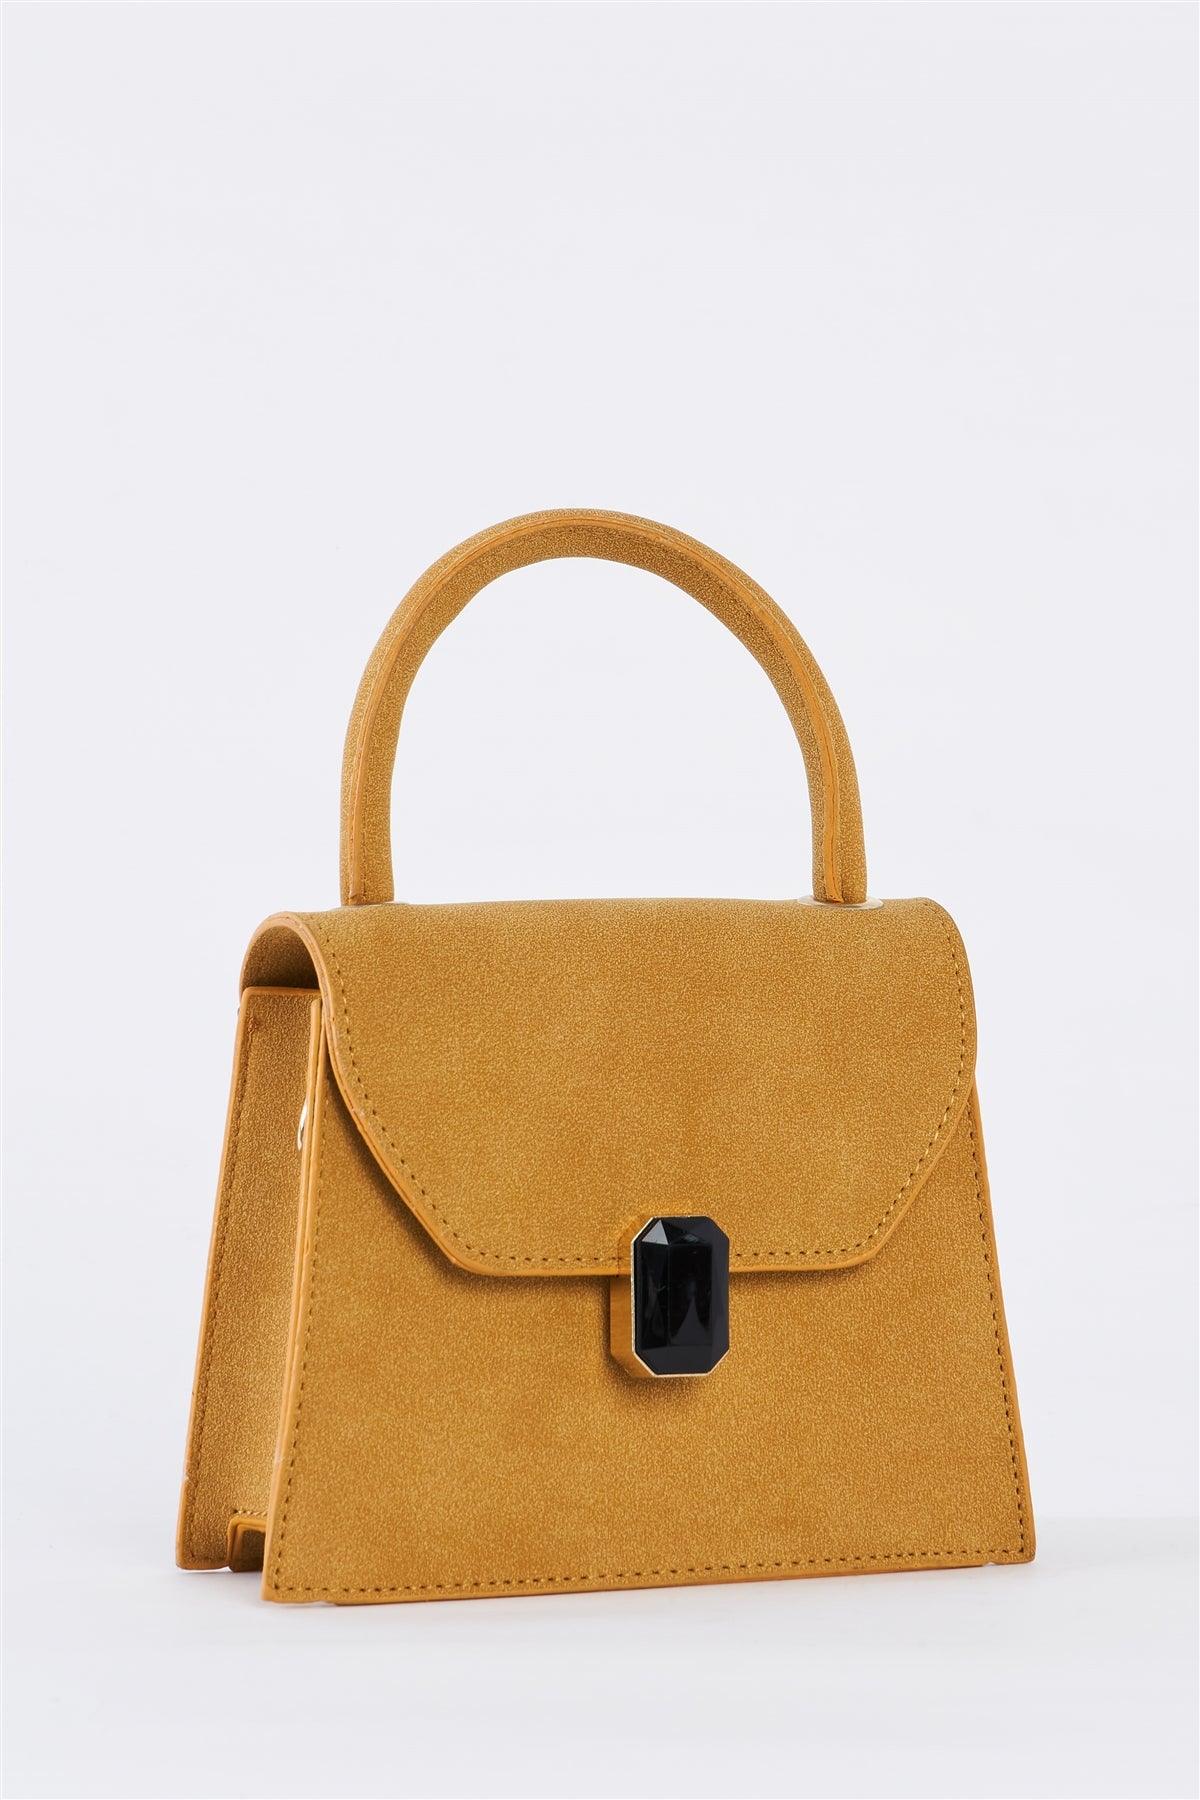 Mustard Yellow Vintage Inspired Purse With Gem Closure Detail /3 Bags